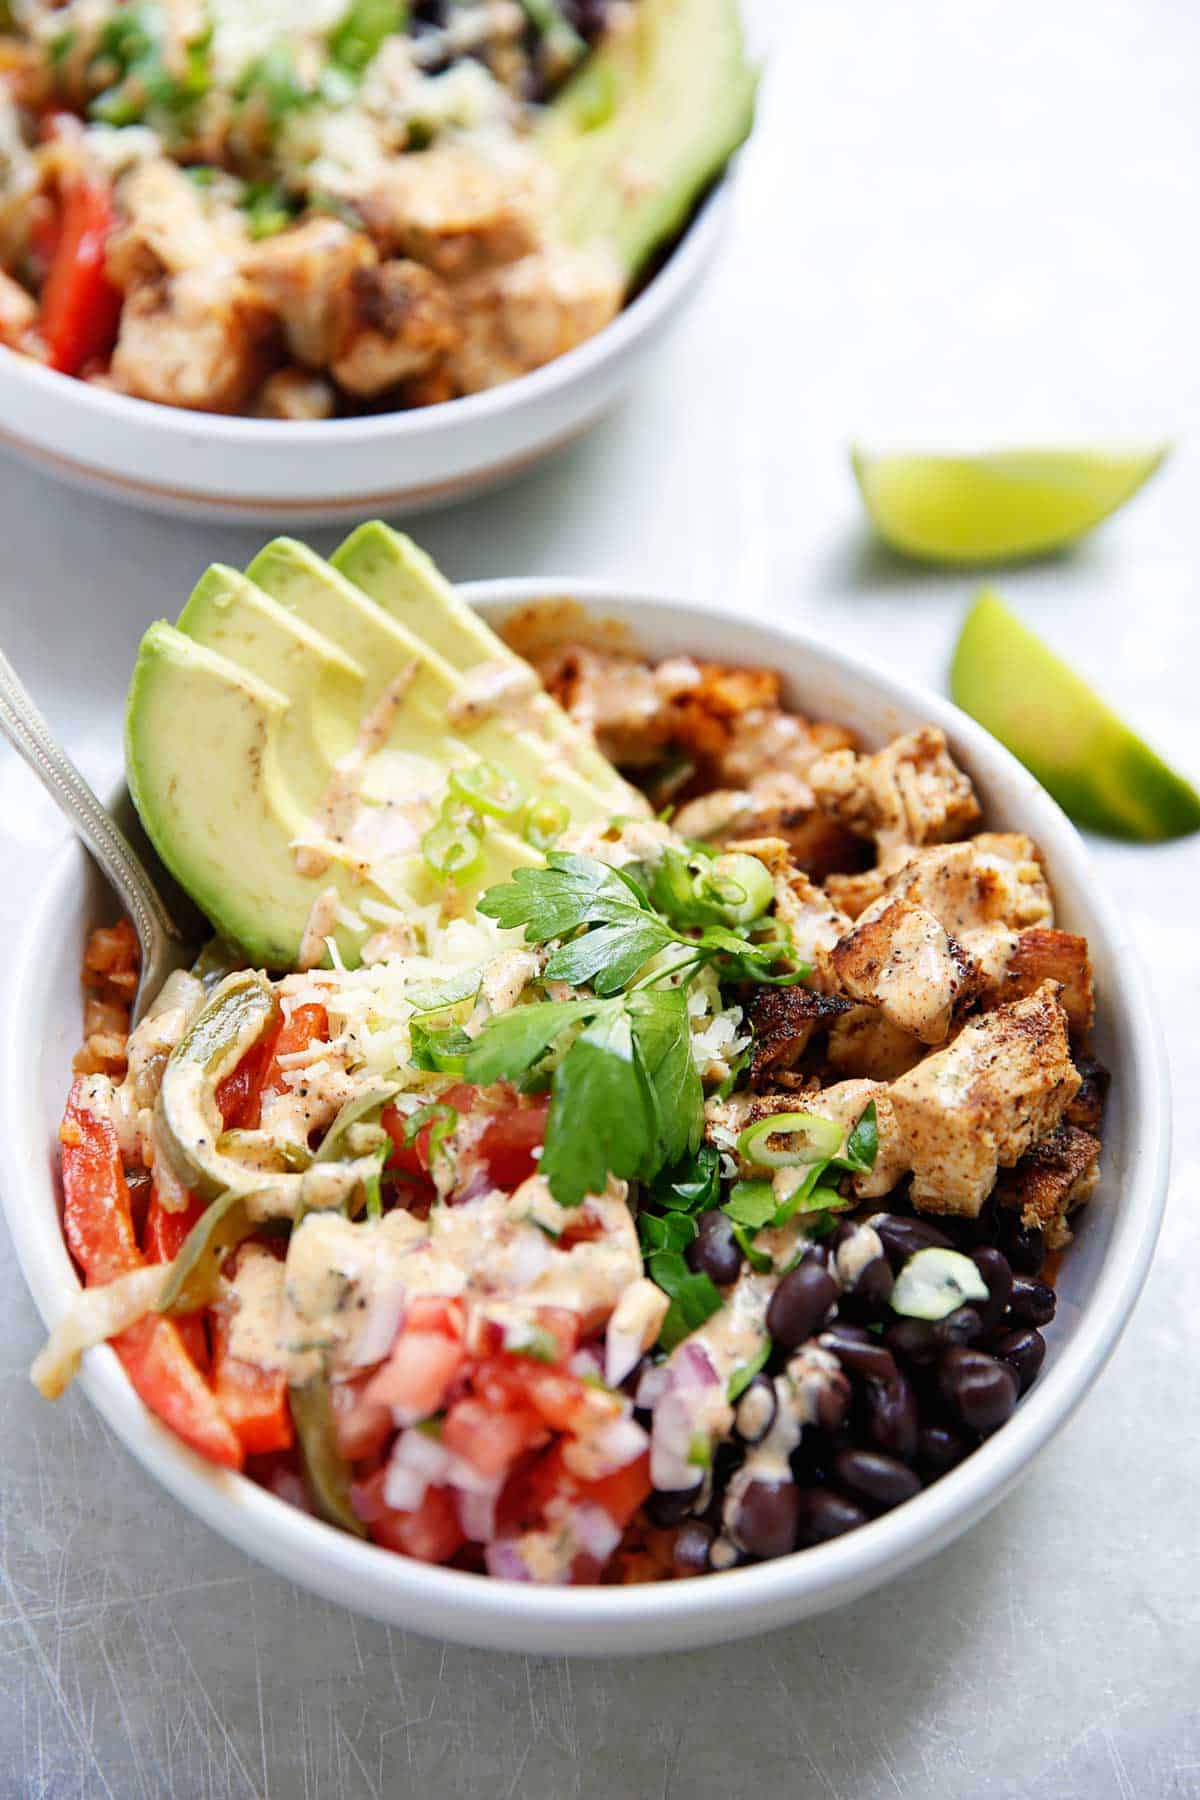 Chicken Burrito Bowl {Low-carb, grain-free, dairy-free}| Lexi's Clean Kitchen